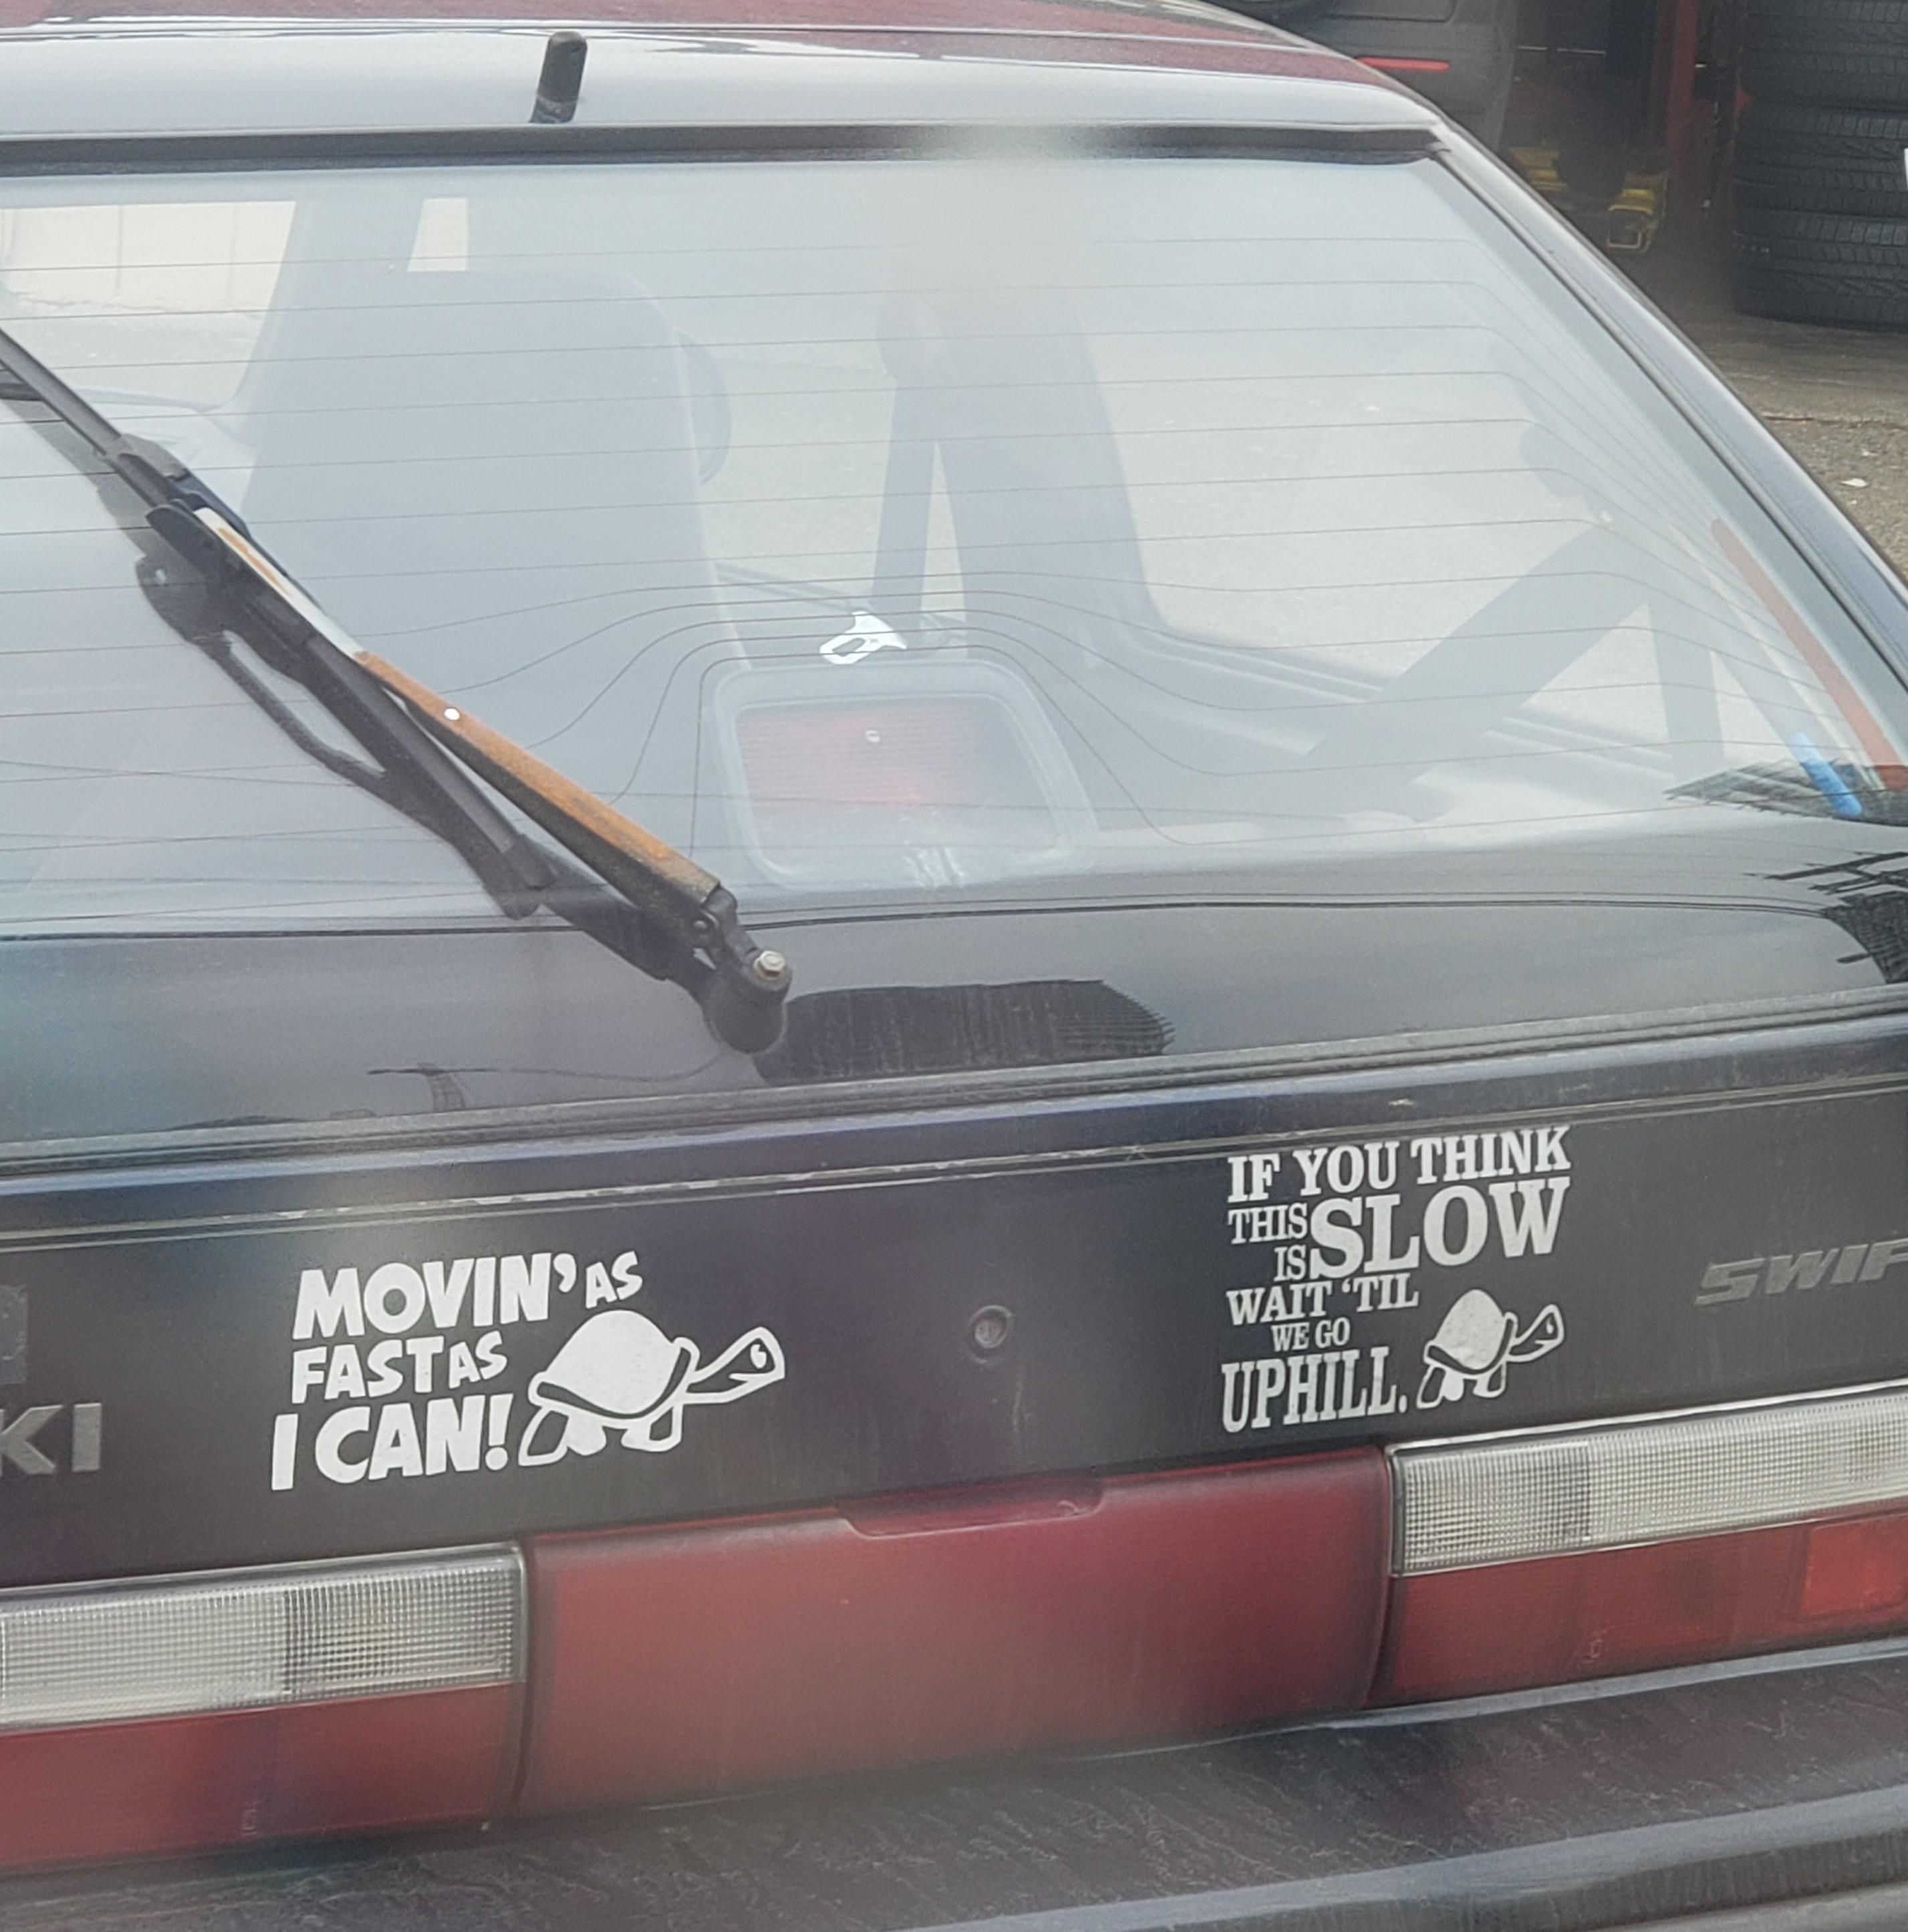 Was stuck behind this guy...